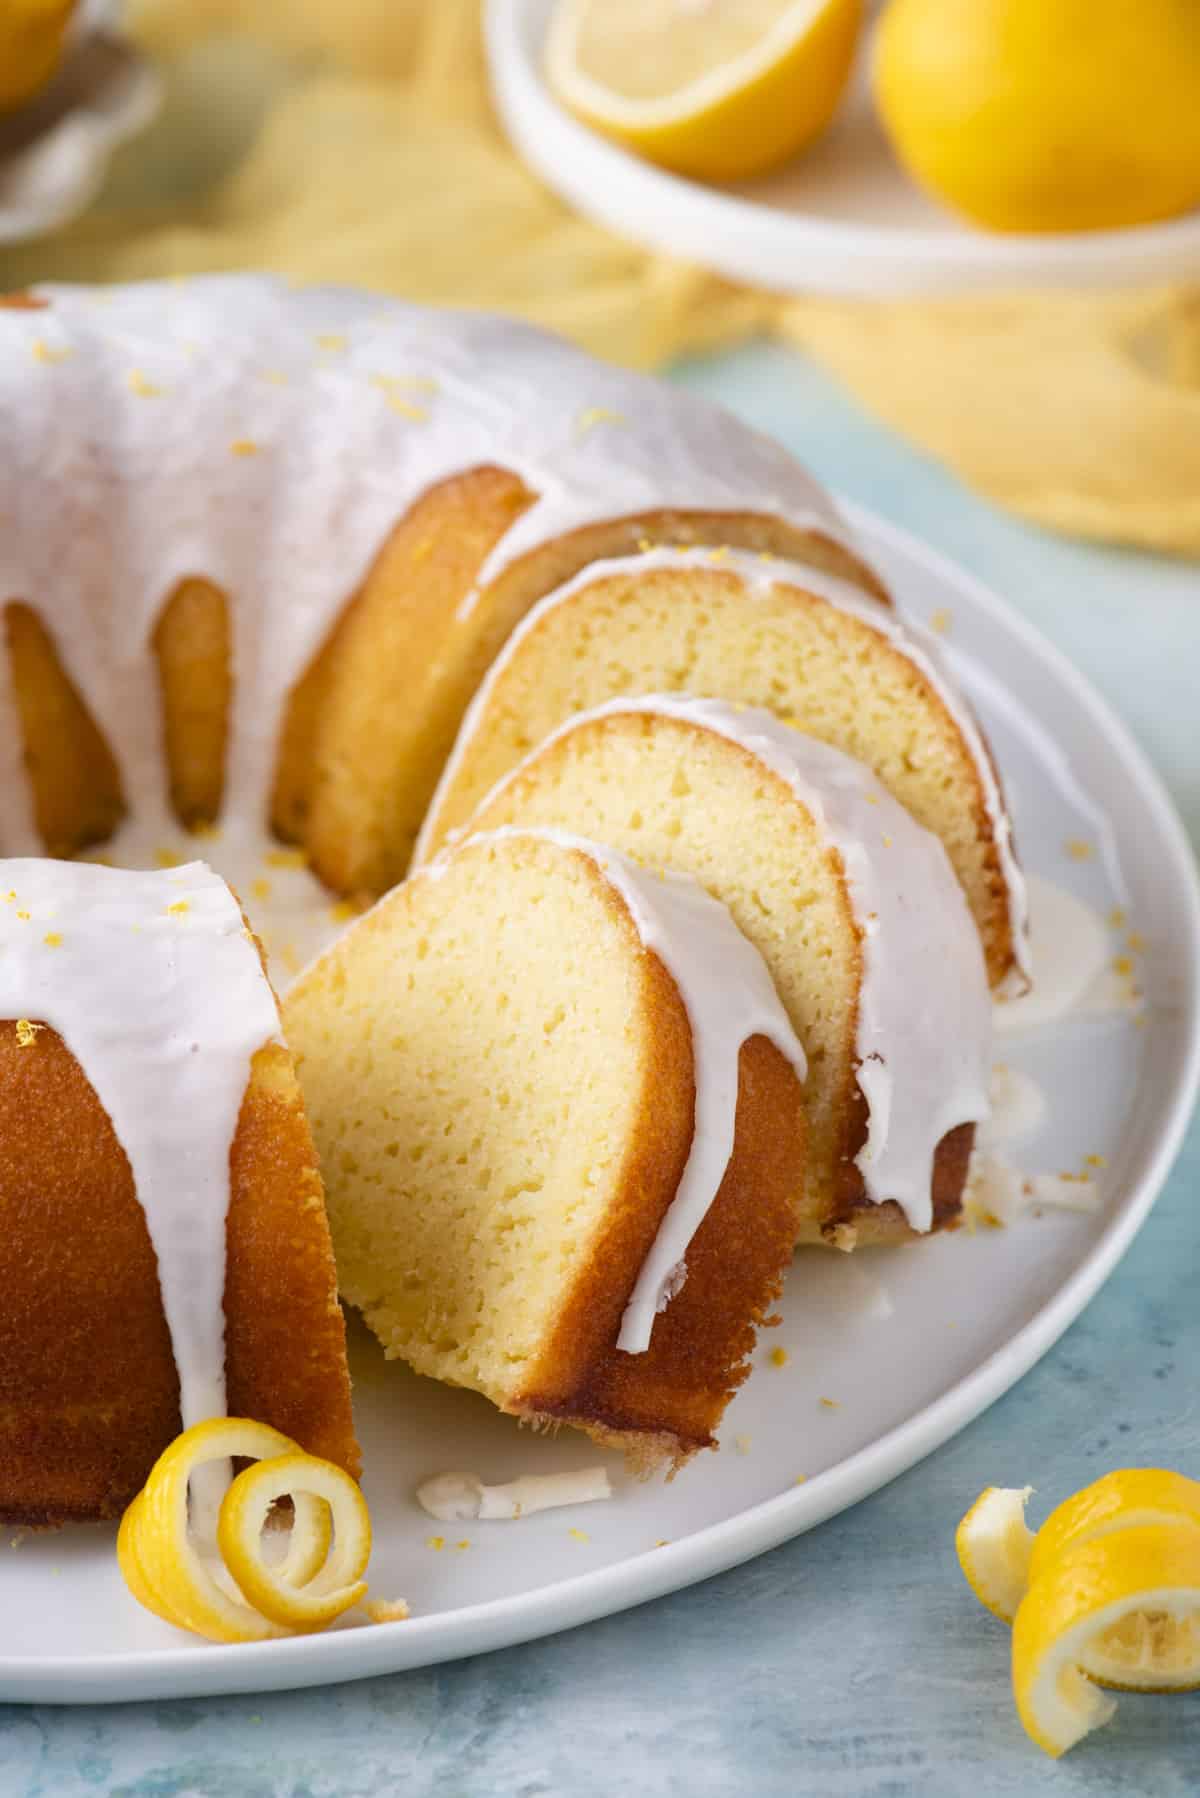 a lemon bundt cake on a round, white plate with three slices cut and the rest of the cake whole, surrounded by fresh lemon peels and a small white plate with fresh lemons on it